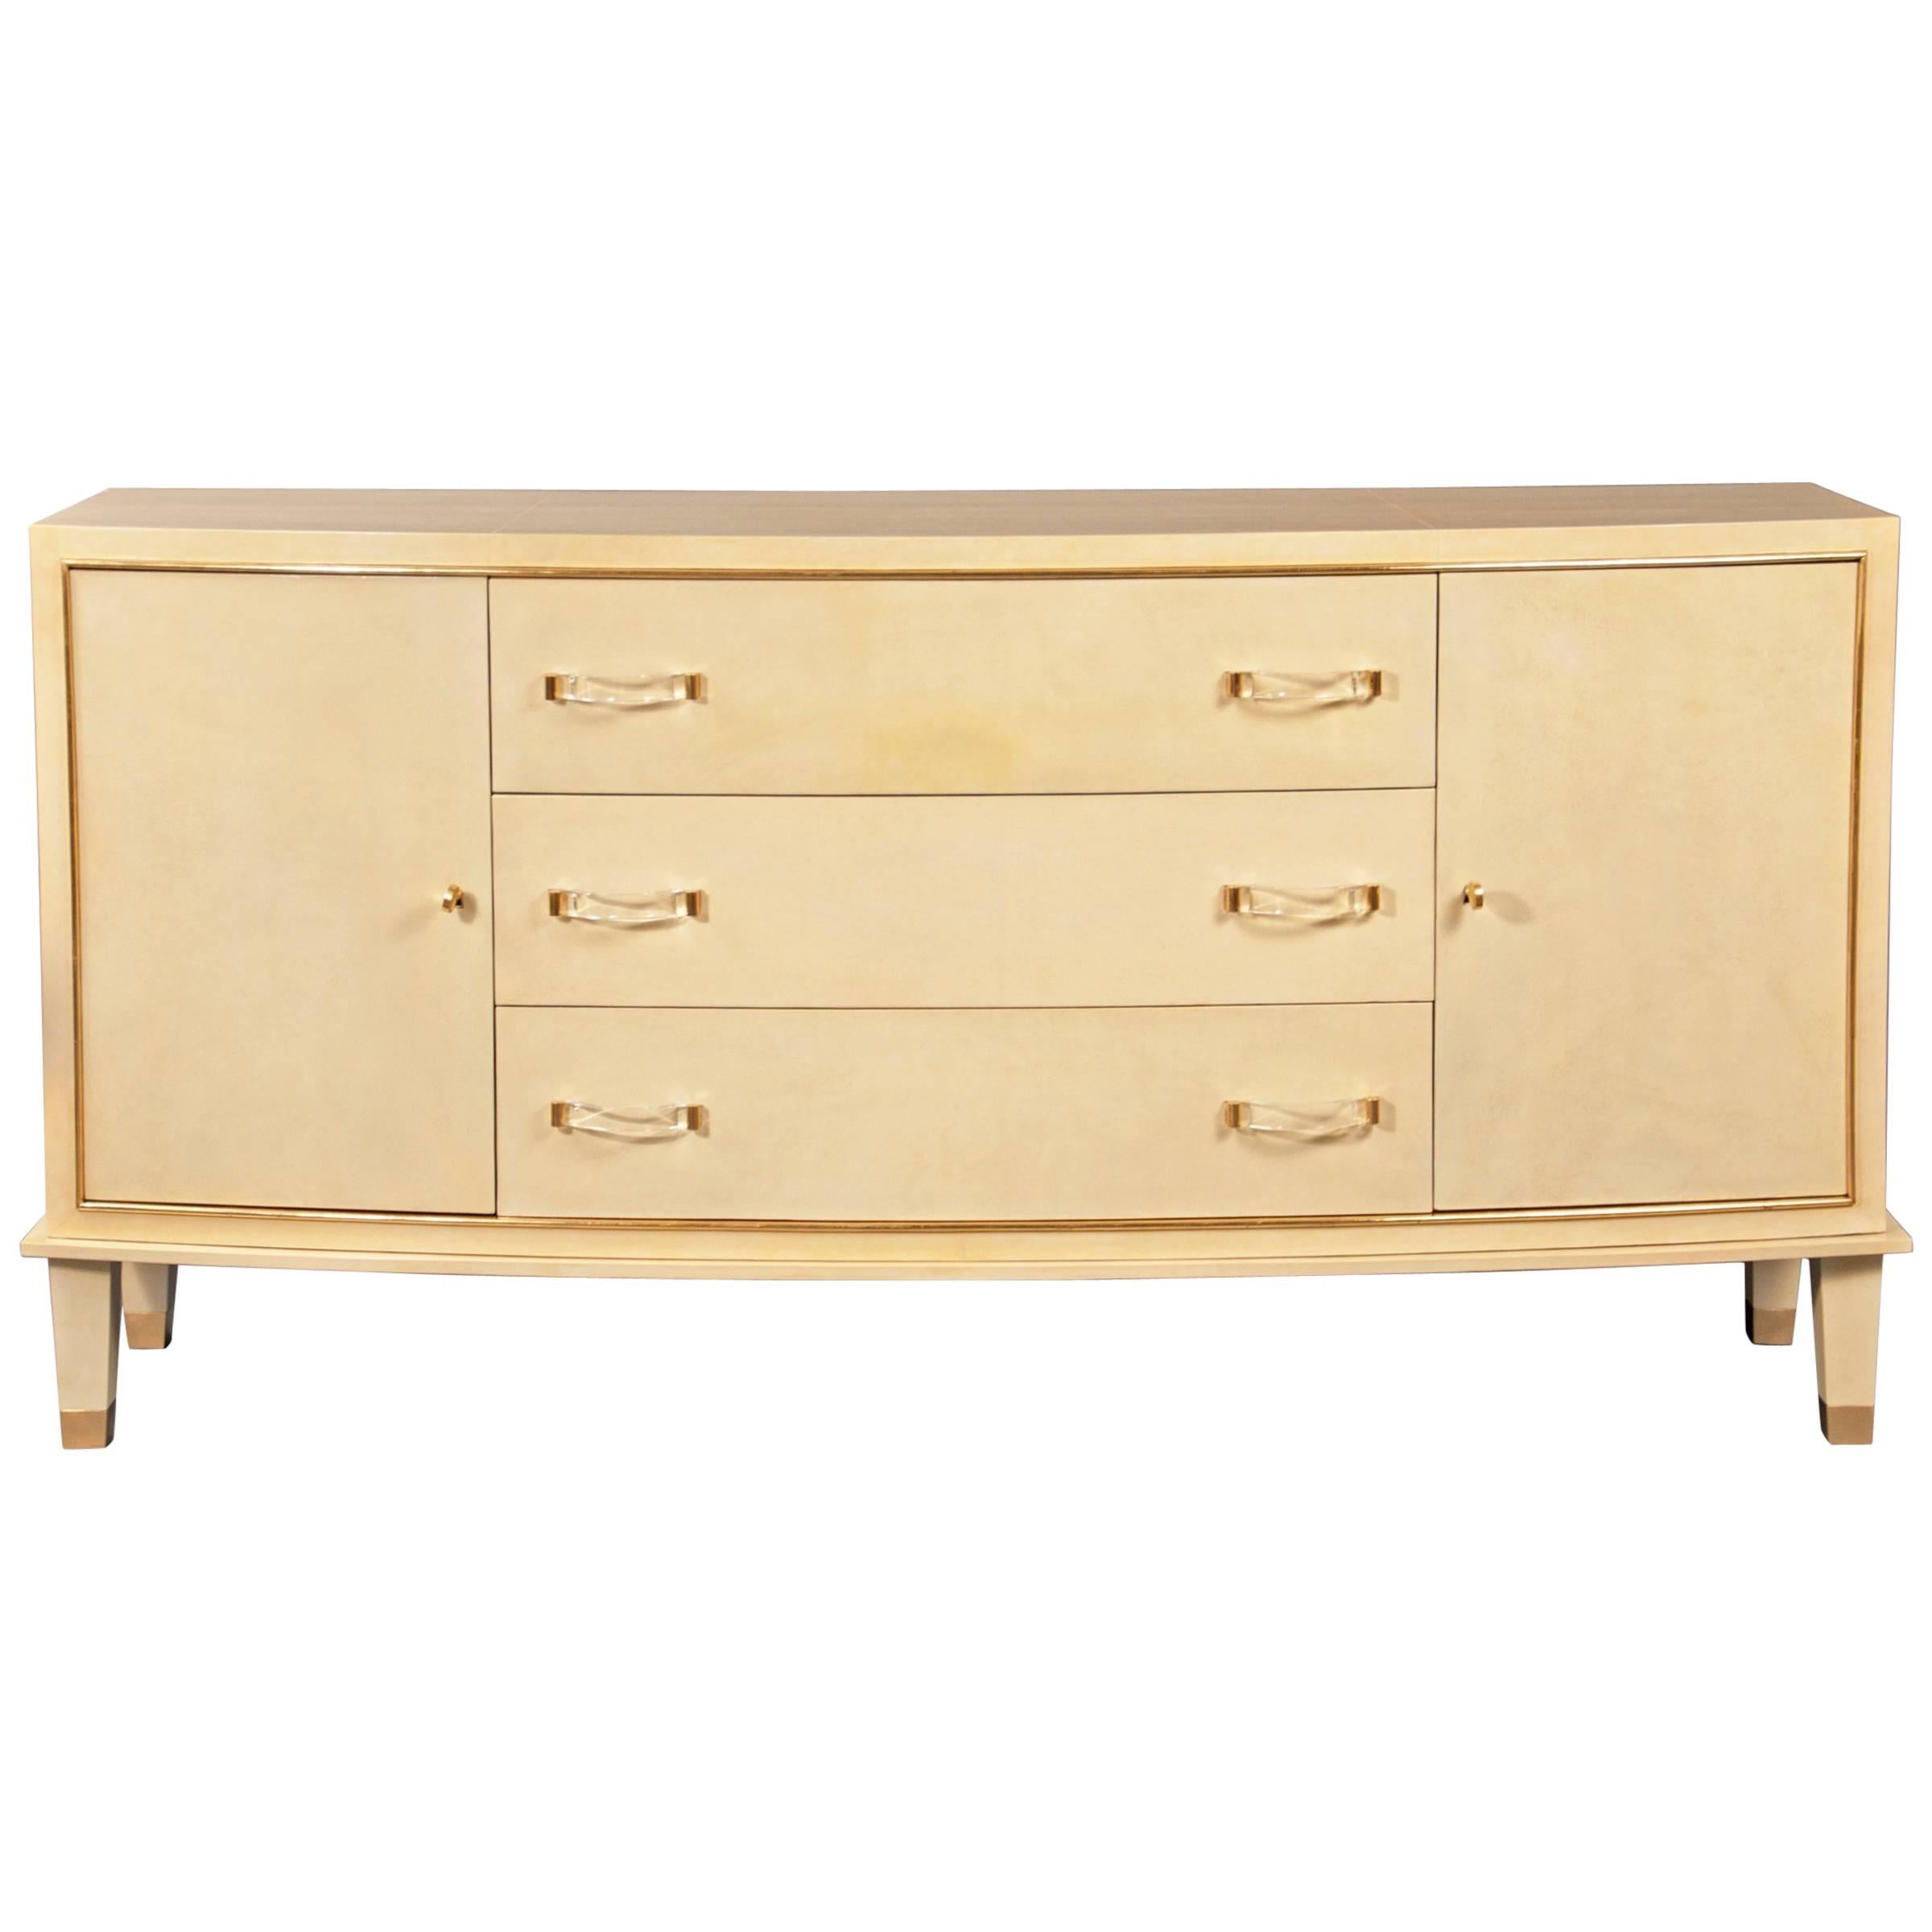  Commode or Sideboard Jacques Adnet, France Art Moderne, circa 1940